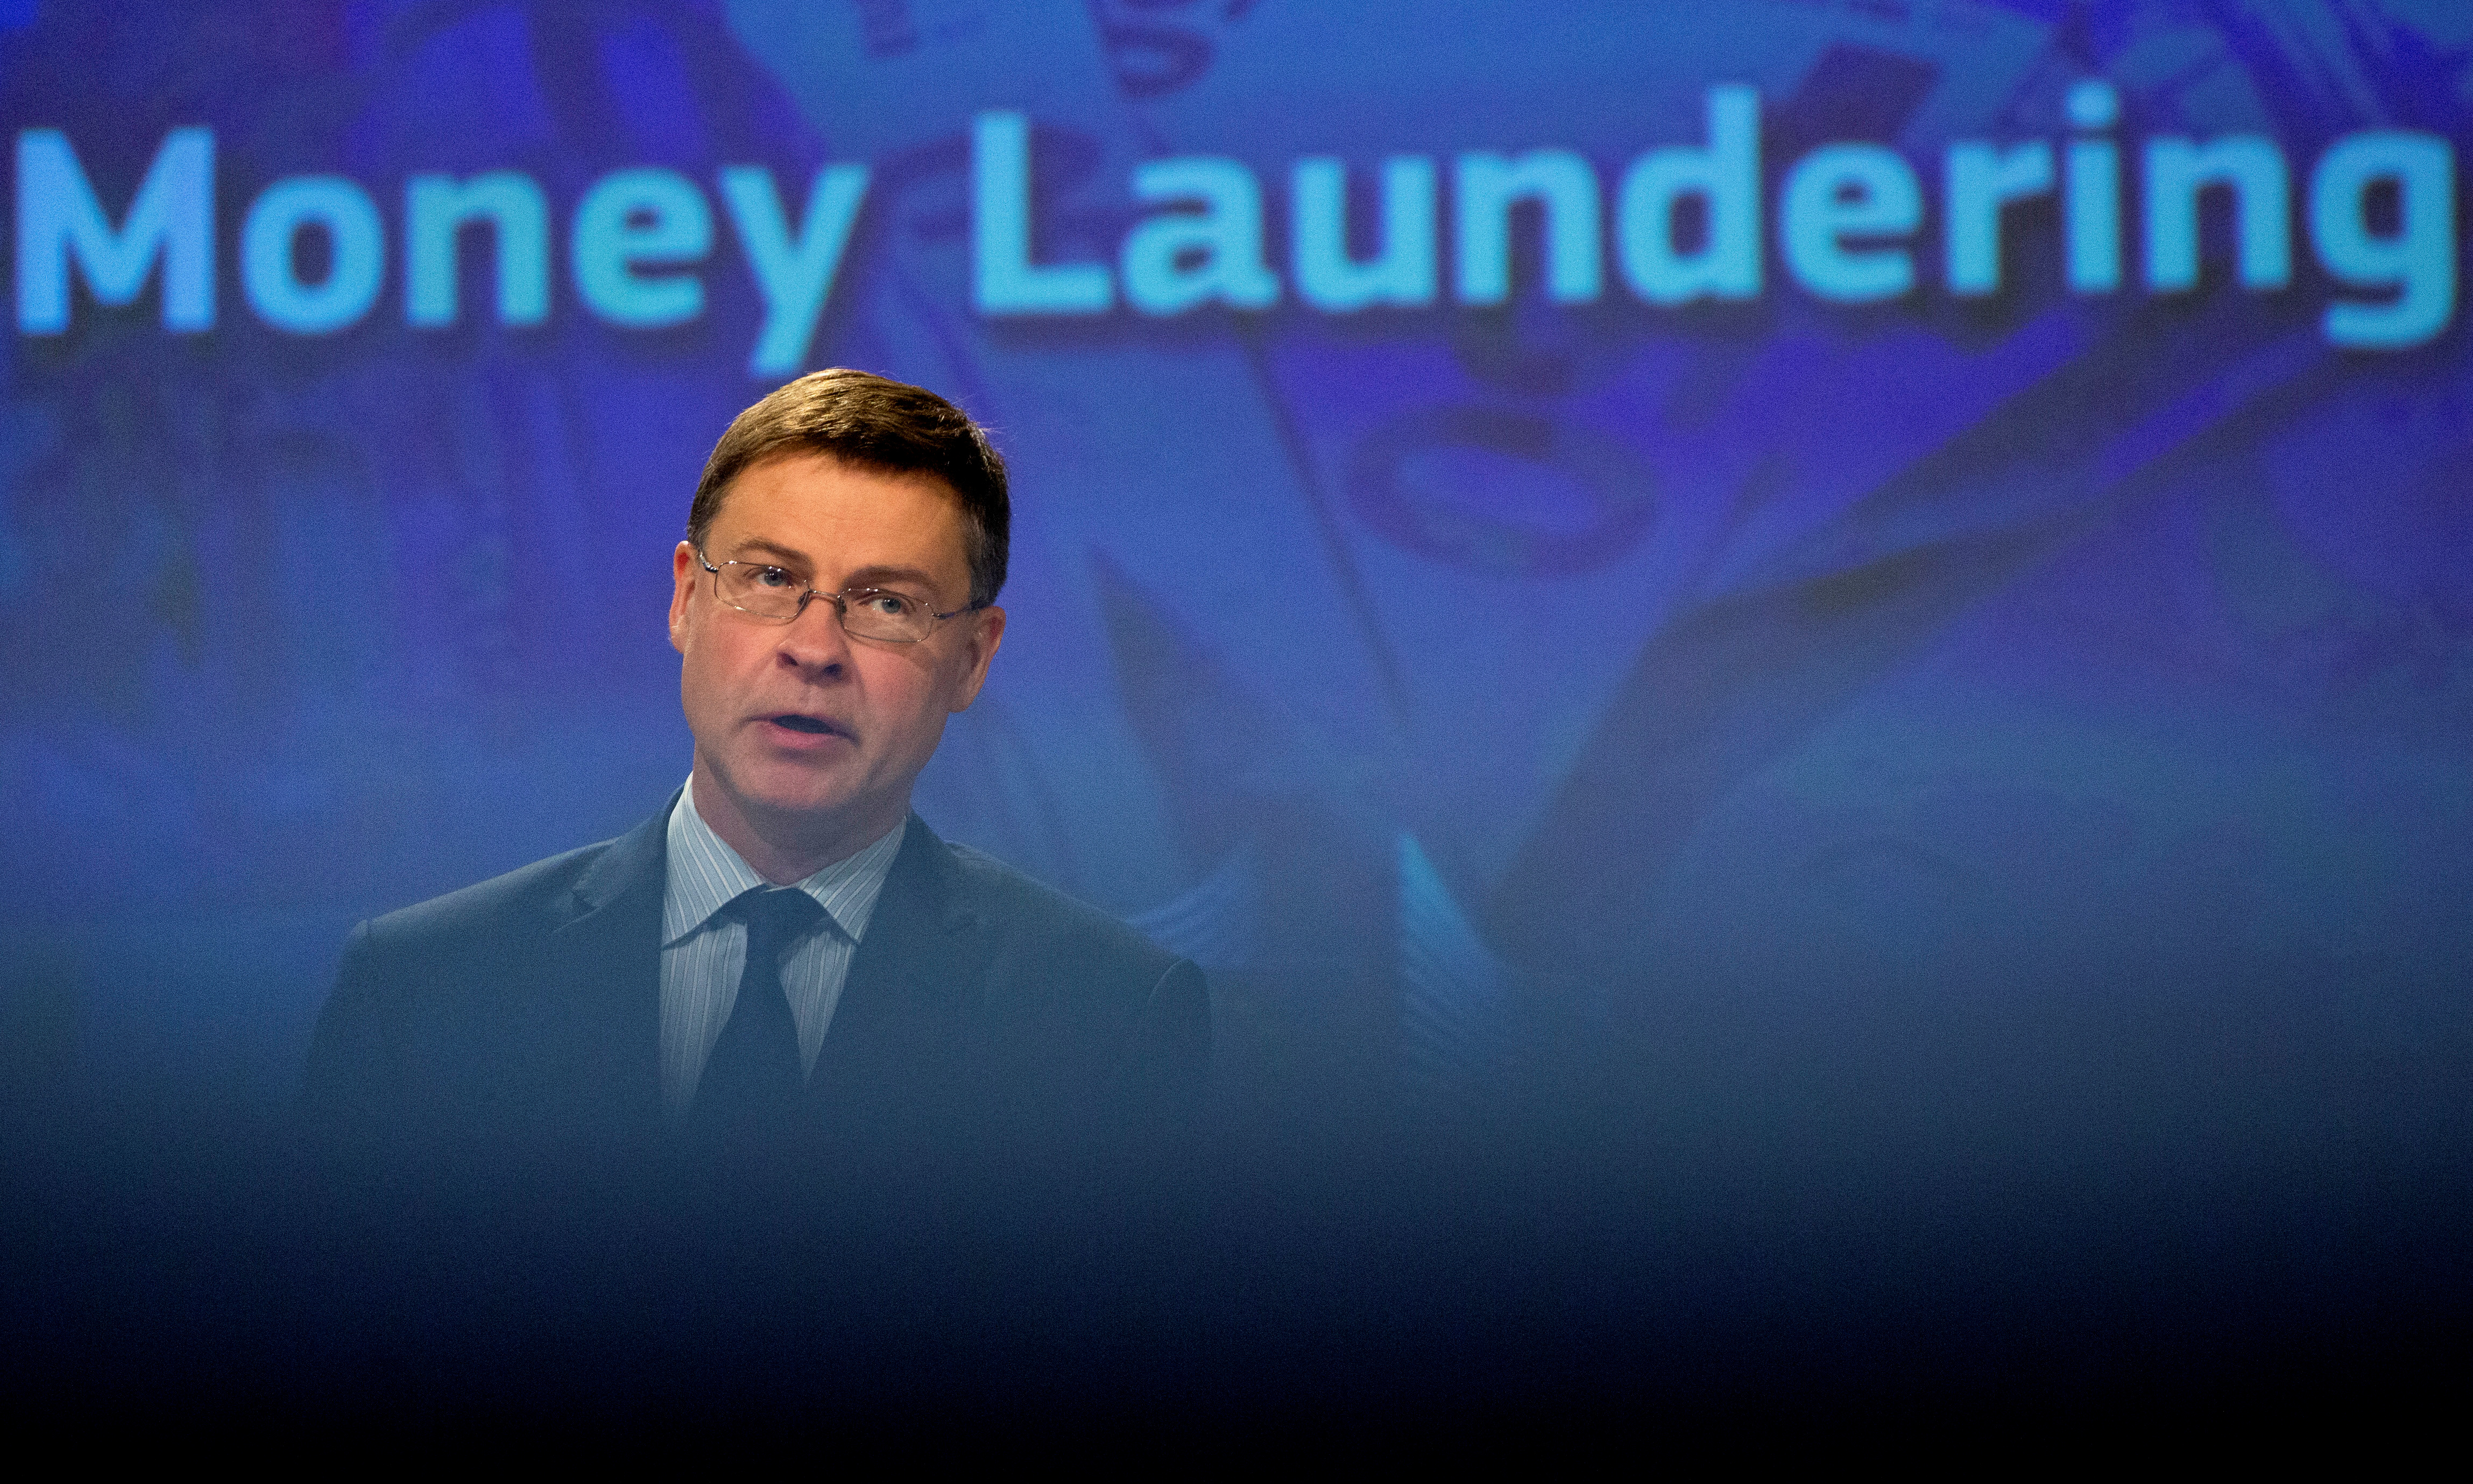 European Commission Vice-President Valdis Dombrovskis speaks during a news conference regarding money laundering, as the spread of the coronavirus disease (COVID-19) continues at the EU headquarters in Brussels